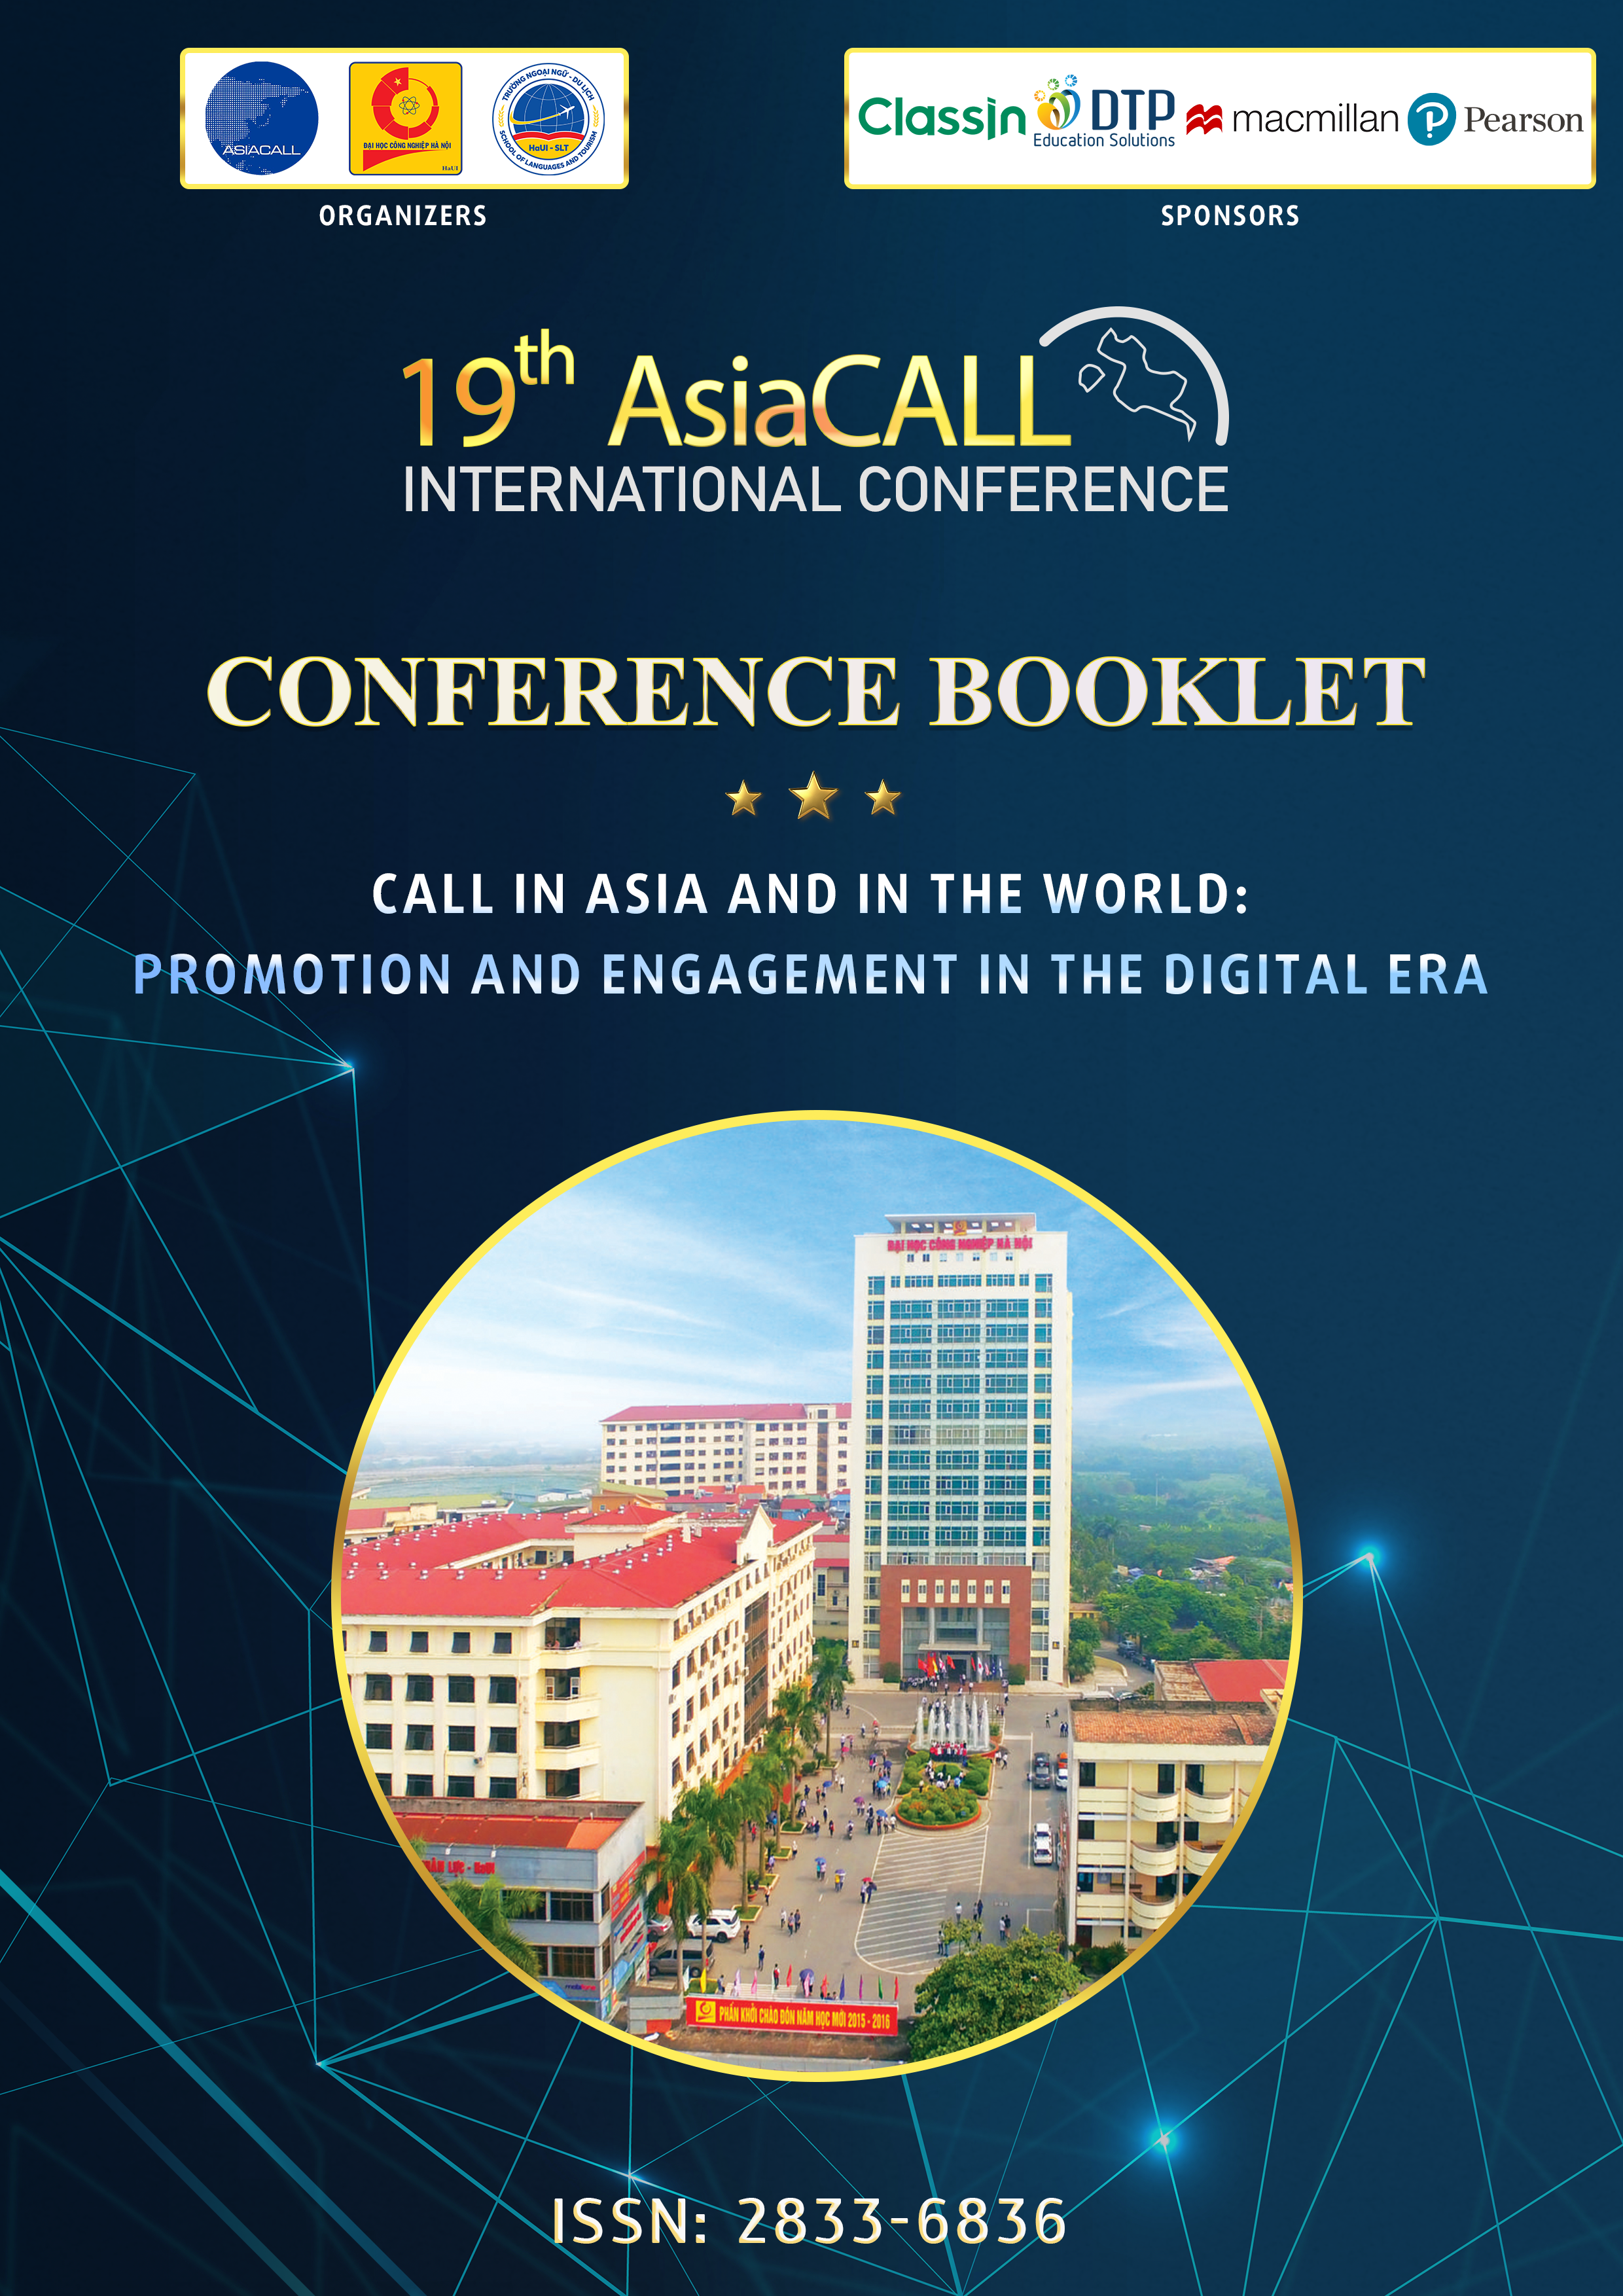 					View Vol. 2 (2022): Conference Booklet of the 19th AsiaCALL International Conference
				